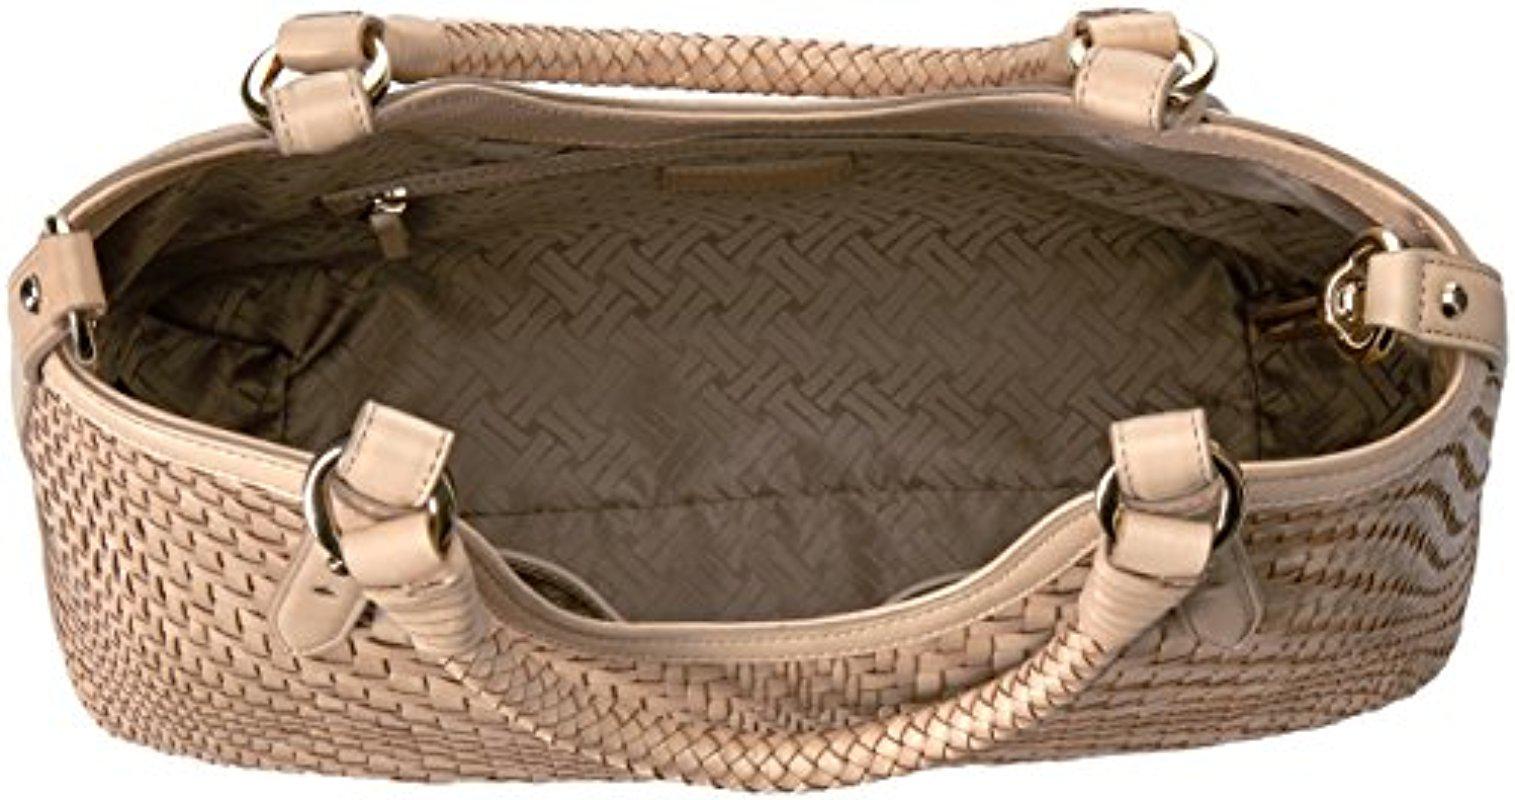 Cole Haan Genevieve Weave Small Convertible Lux Backpack